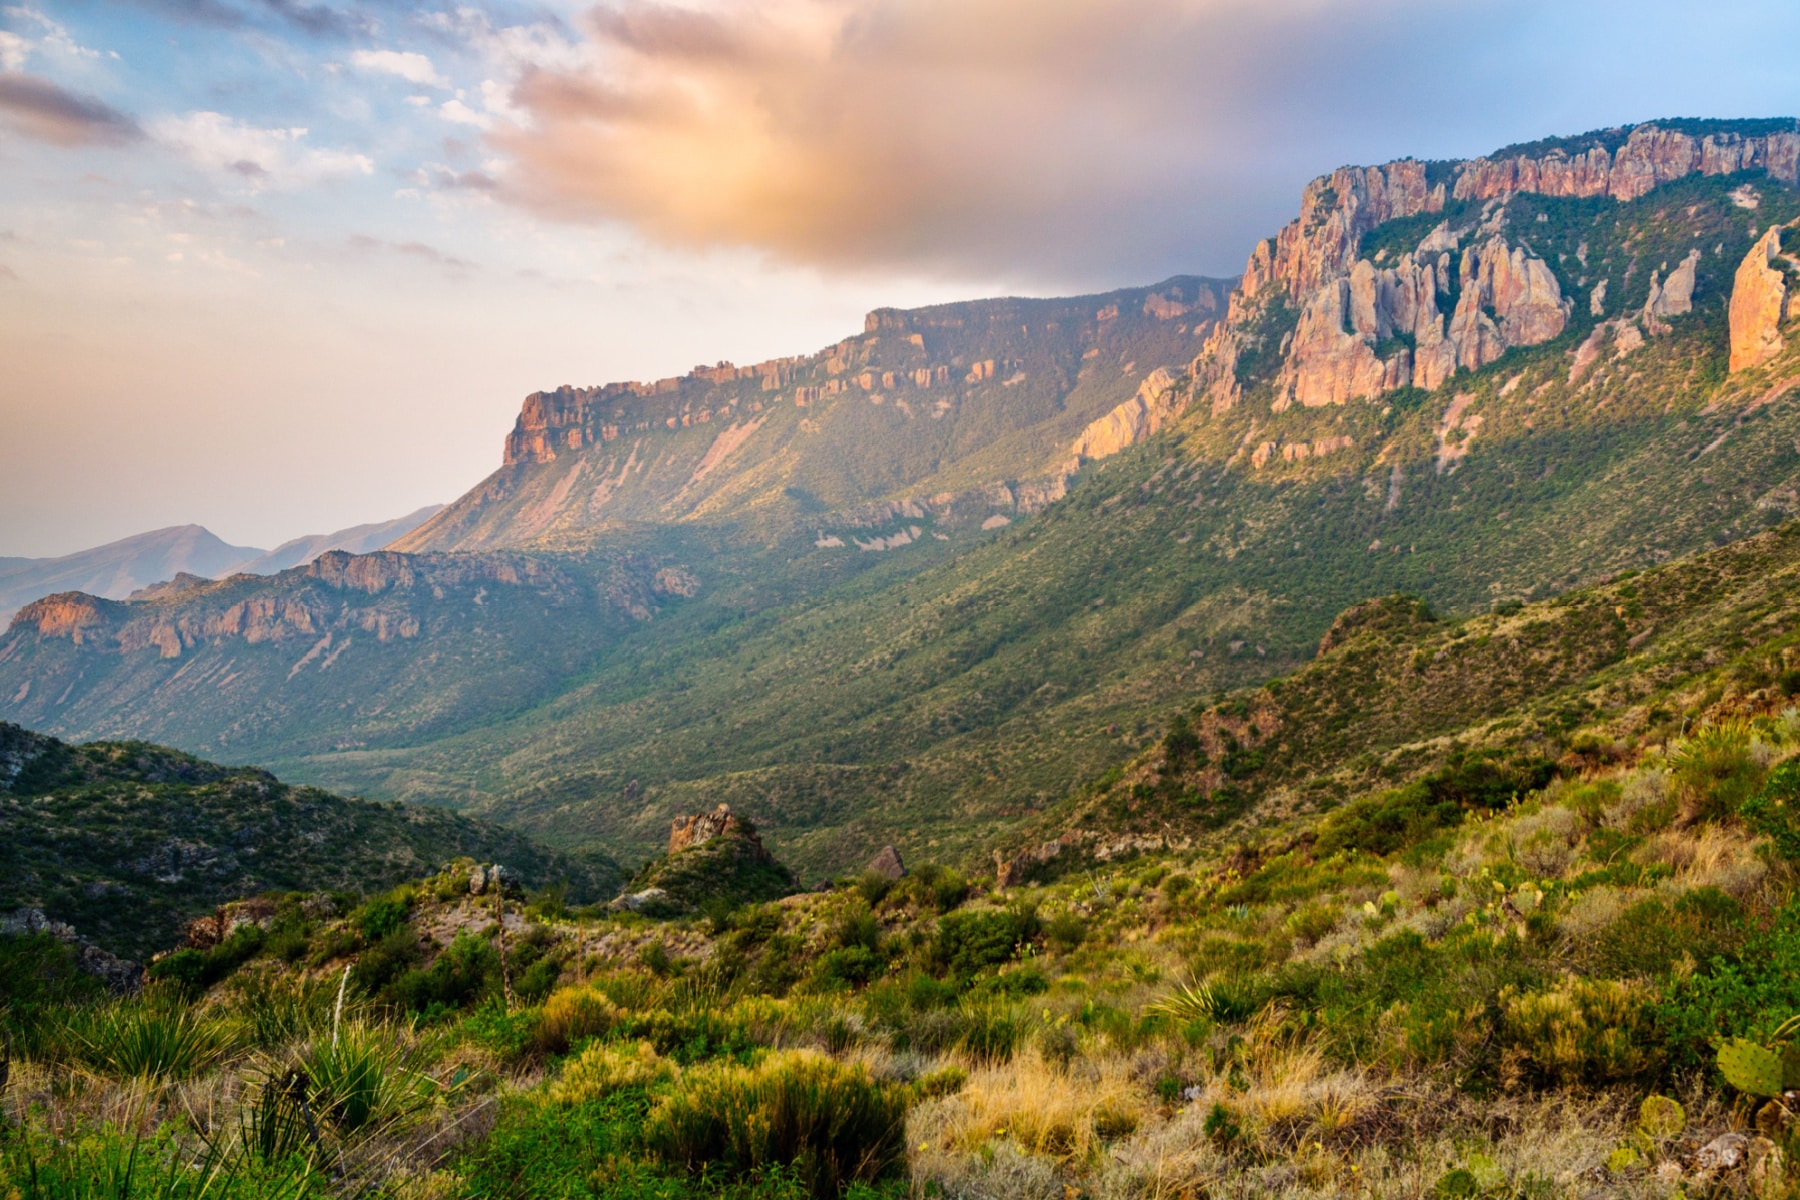 Stunning mountains arise from a green valley in the best hikes of Big Bend National Park.